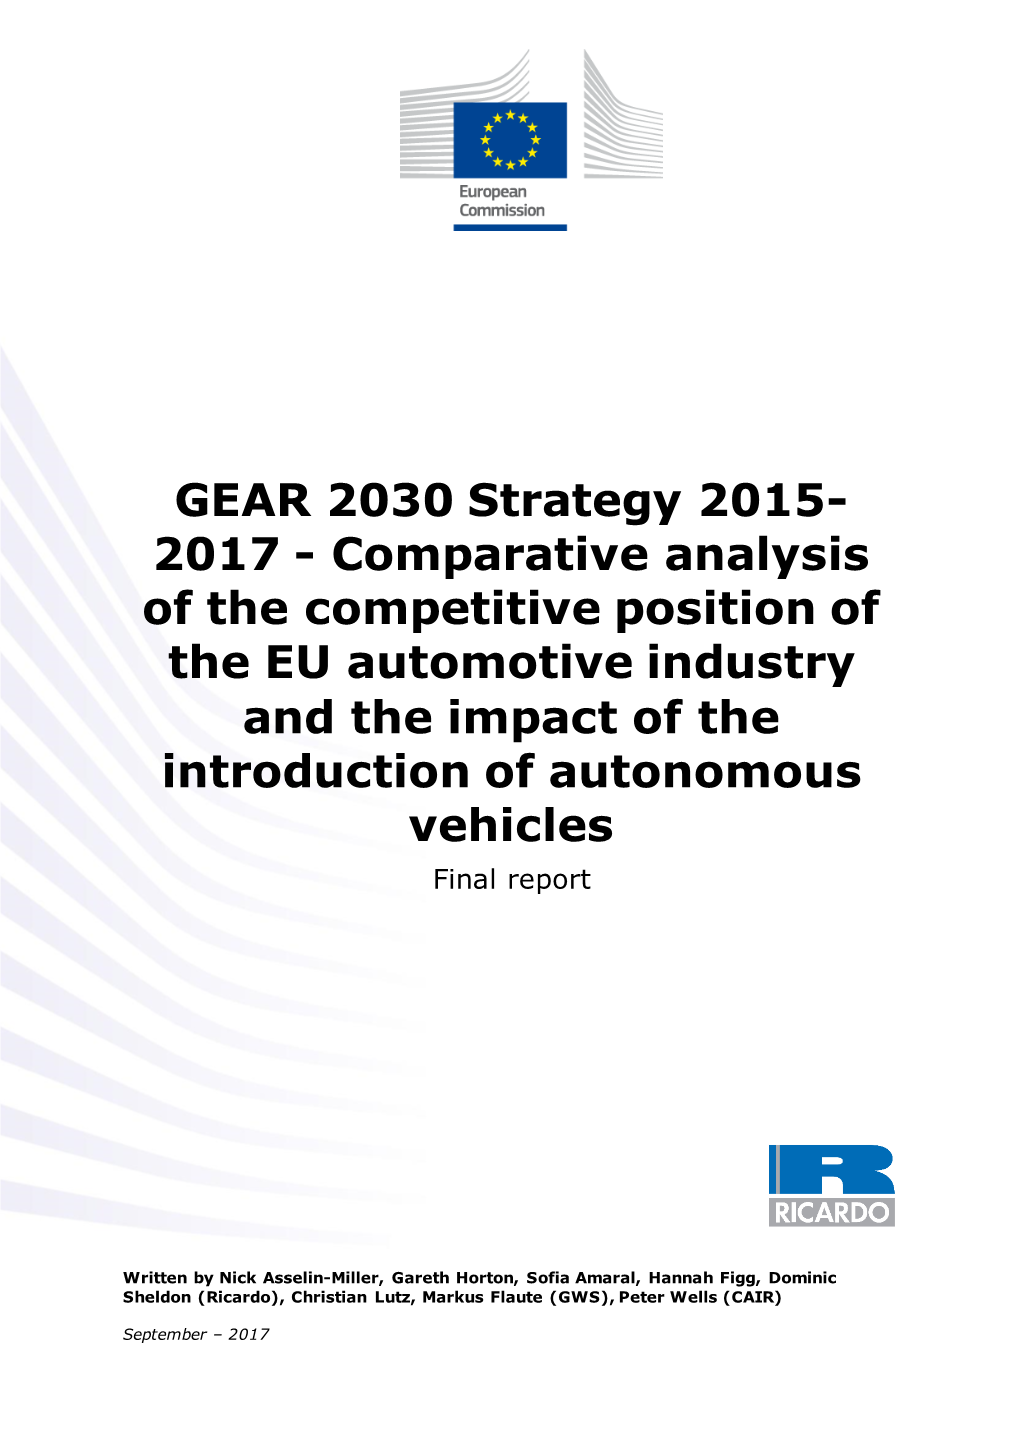 Comparative Analysis of the Competitive Position of the EU Automotive Industry and the Impact of the Introduction of Autonomous Vehicles Final Report